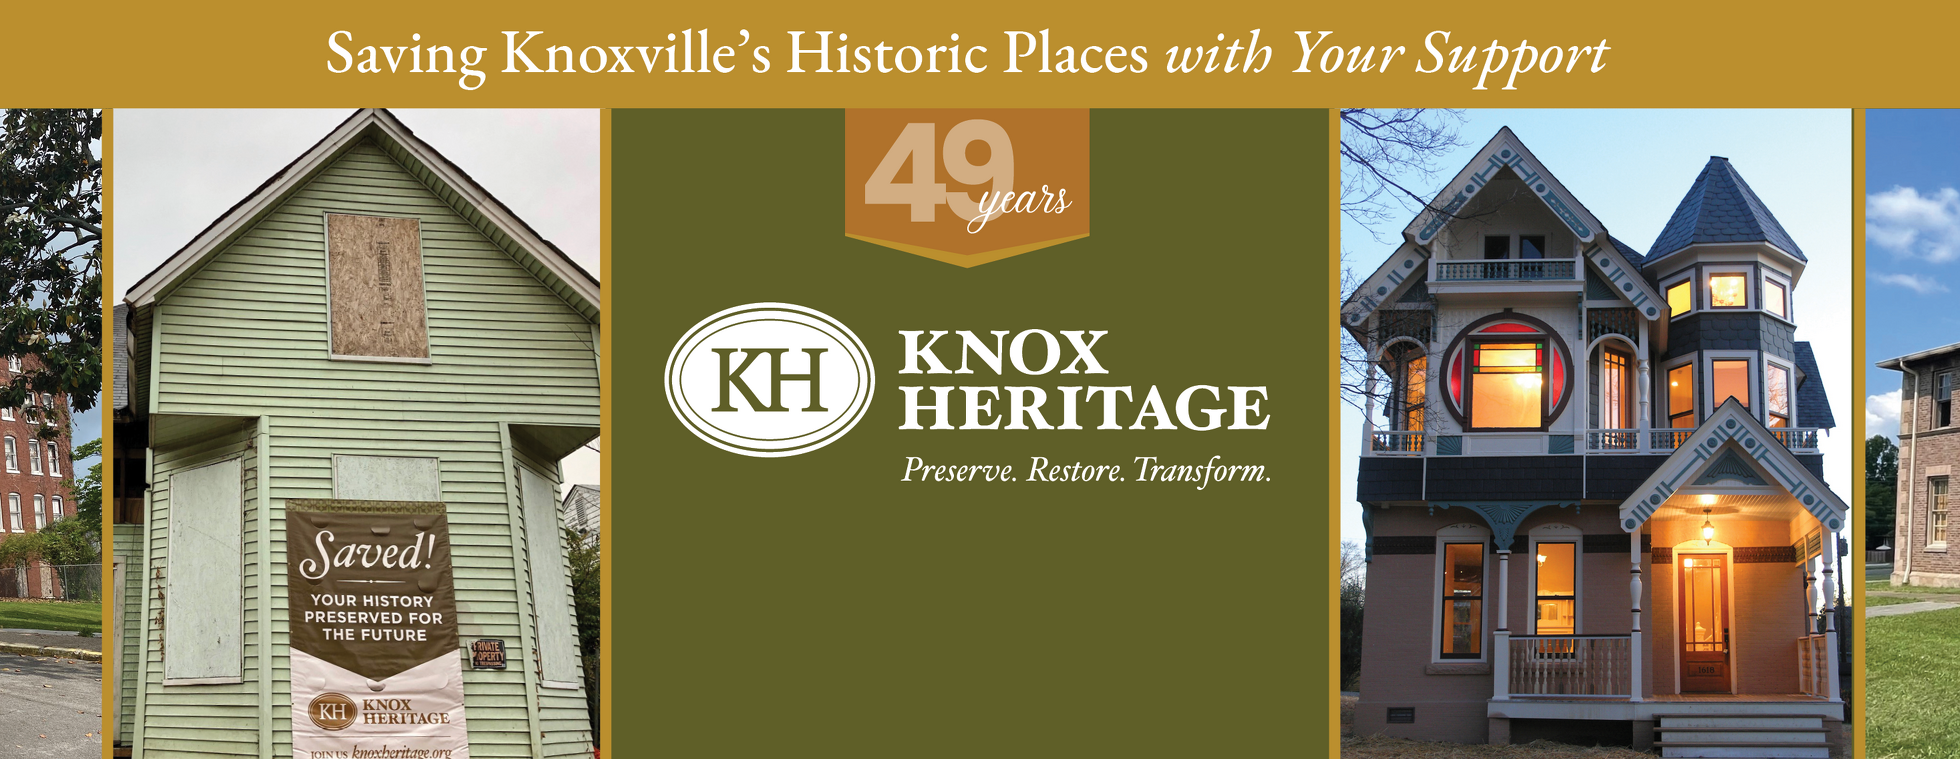 Saving Knoxville's Historic Places with Your Support.